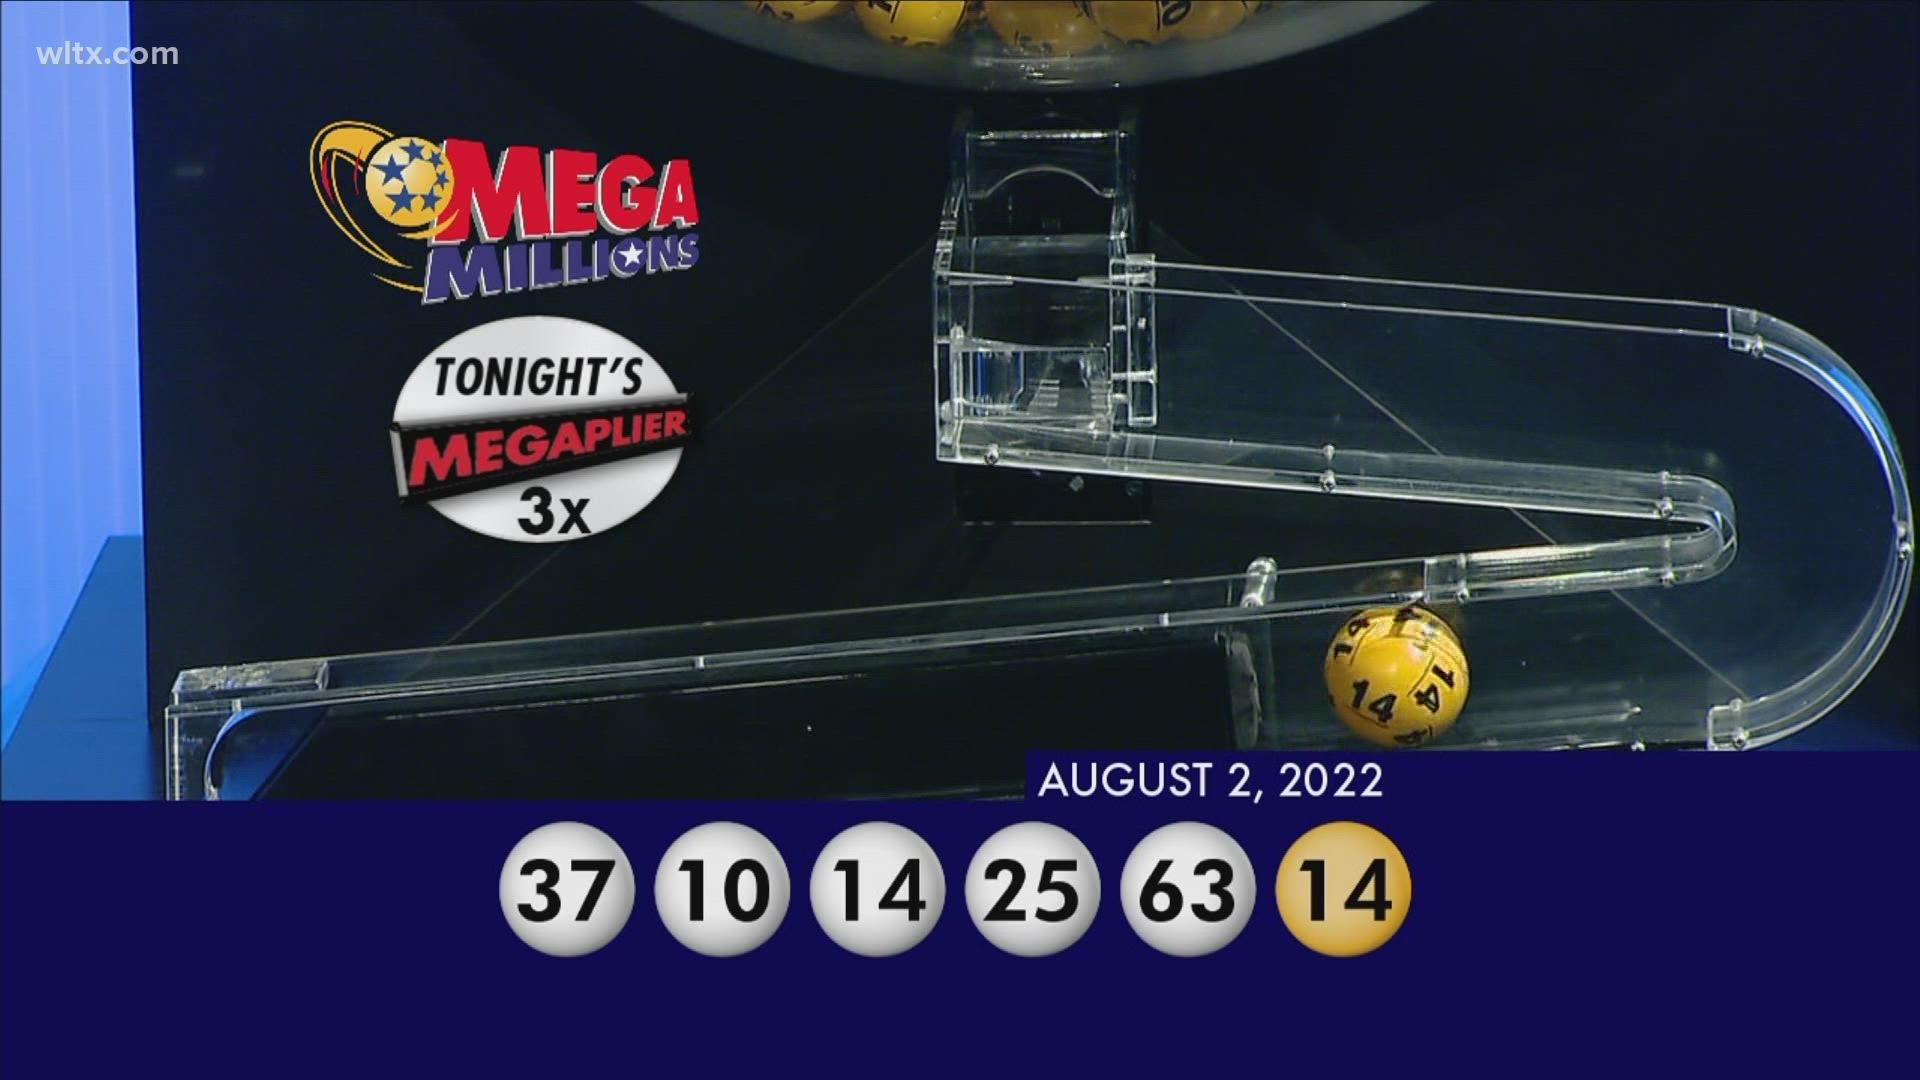 Here are the winning Megamillions numbers for August 2, 2022.